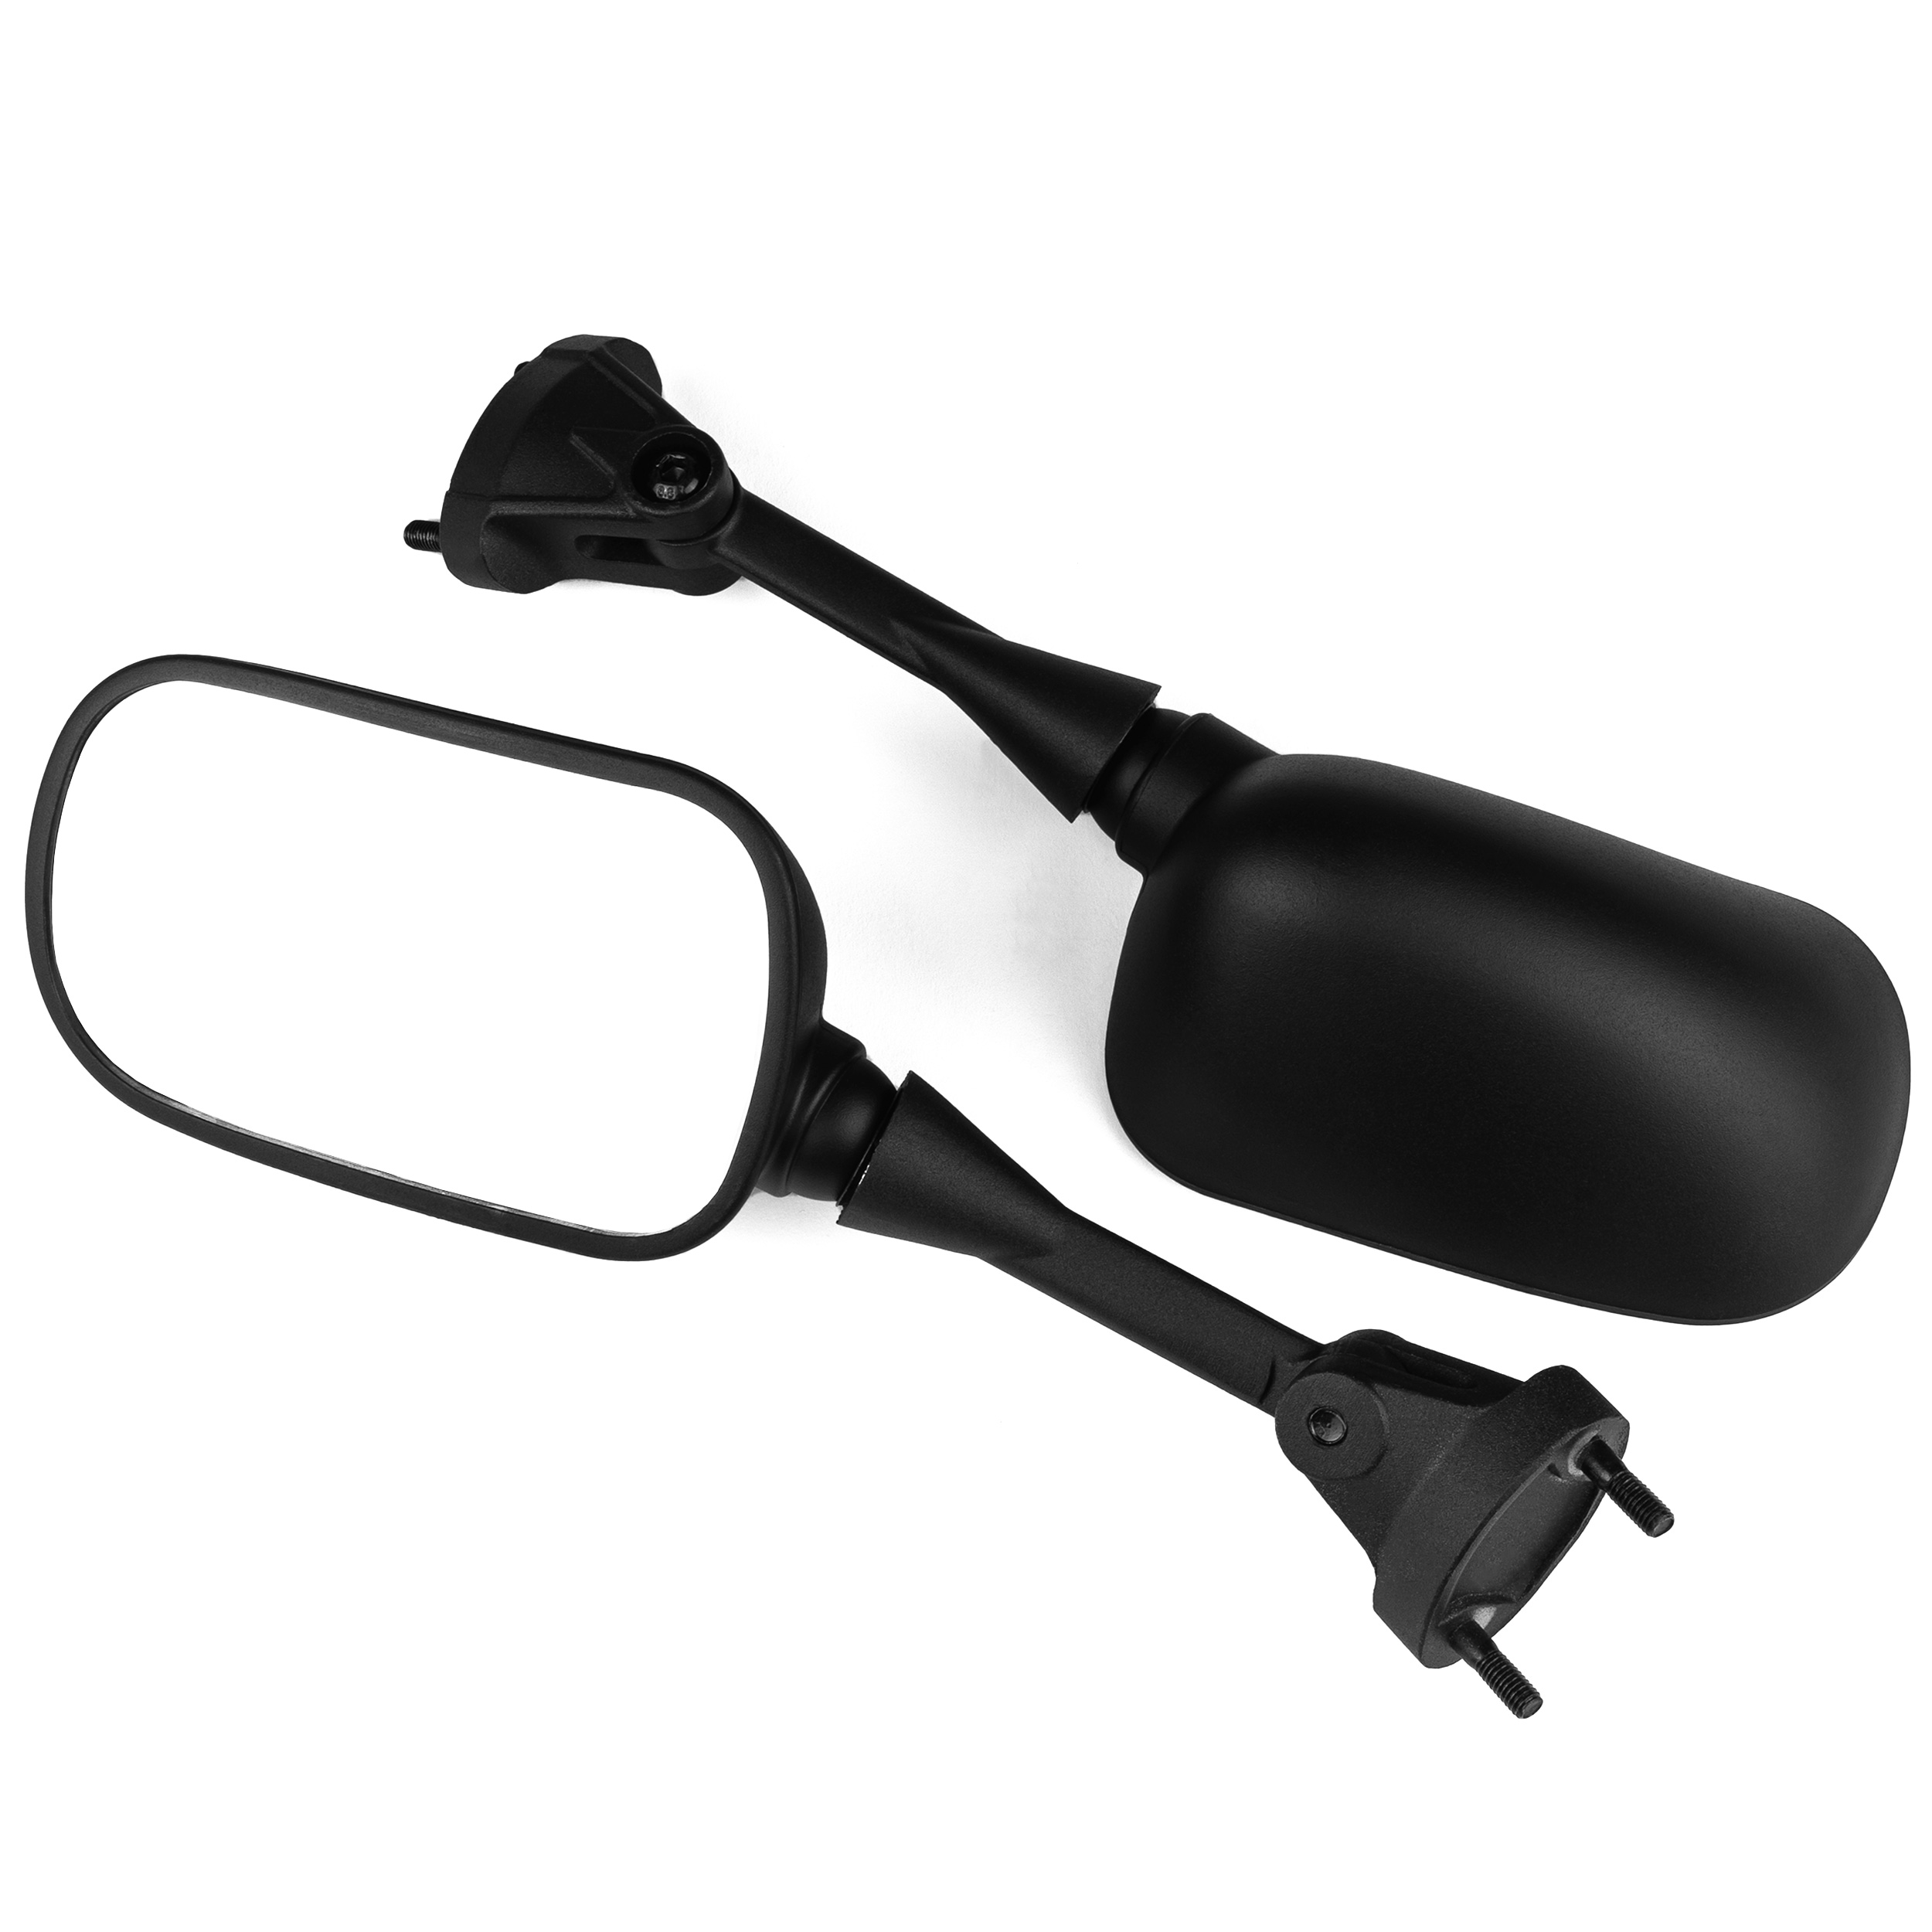 Krator Black OEM Stock Style Racing Mirrors - Compatible with 2004-2010 Kawasaki Ninja ZX10R / ZX6R 2005-2008 Left & Right Set